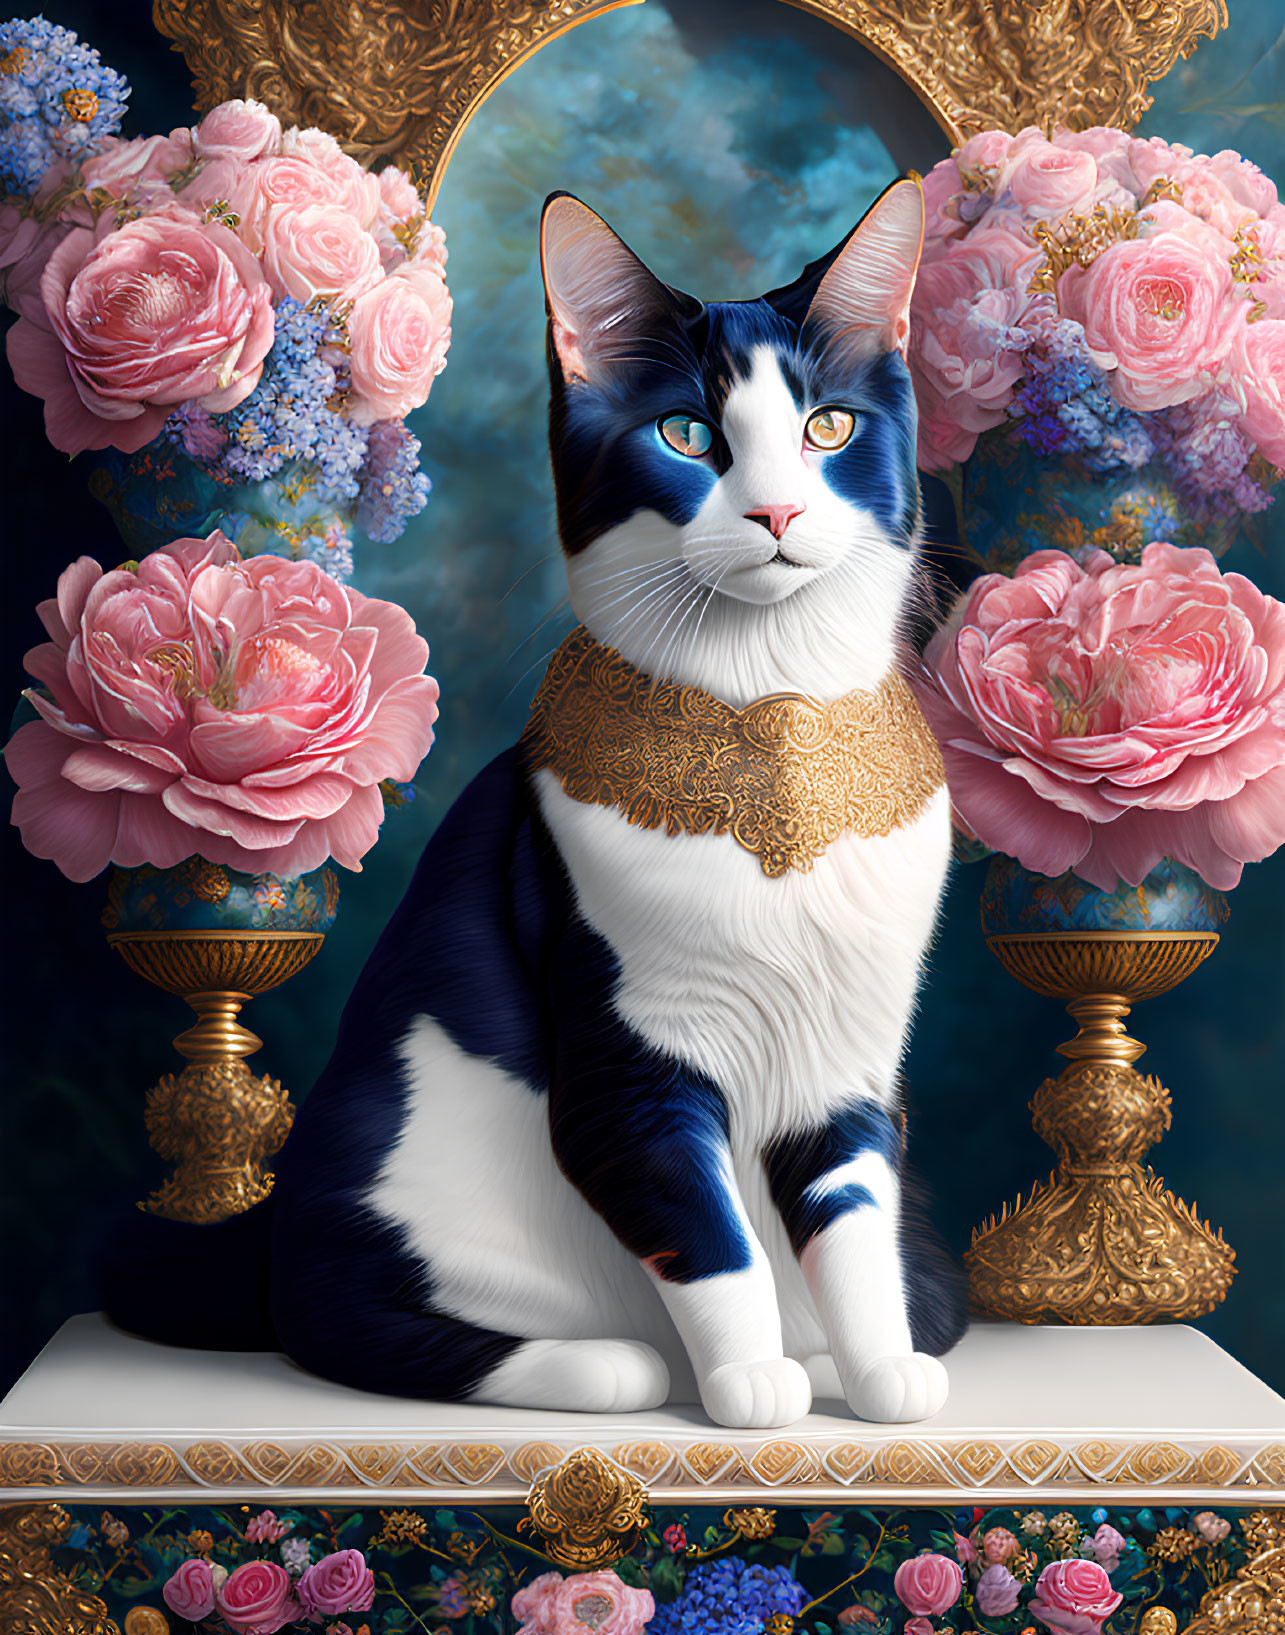 Majestic cat with blue eyes in ornate setting